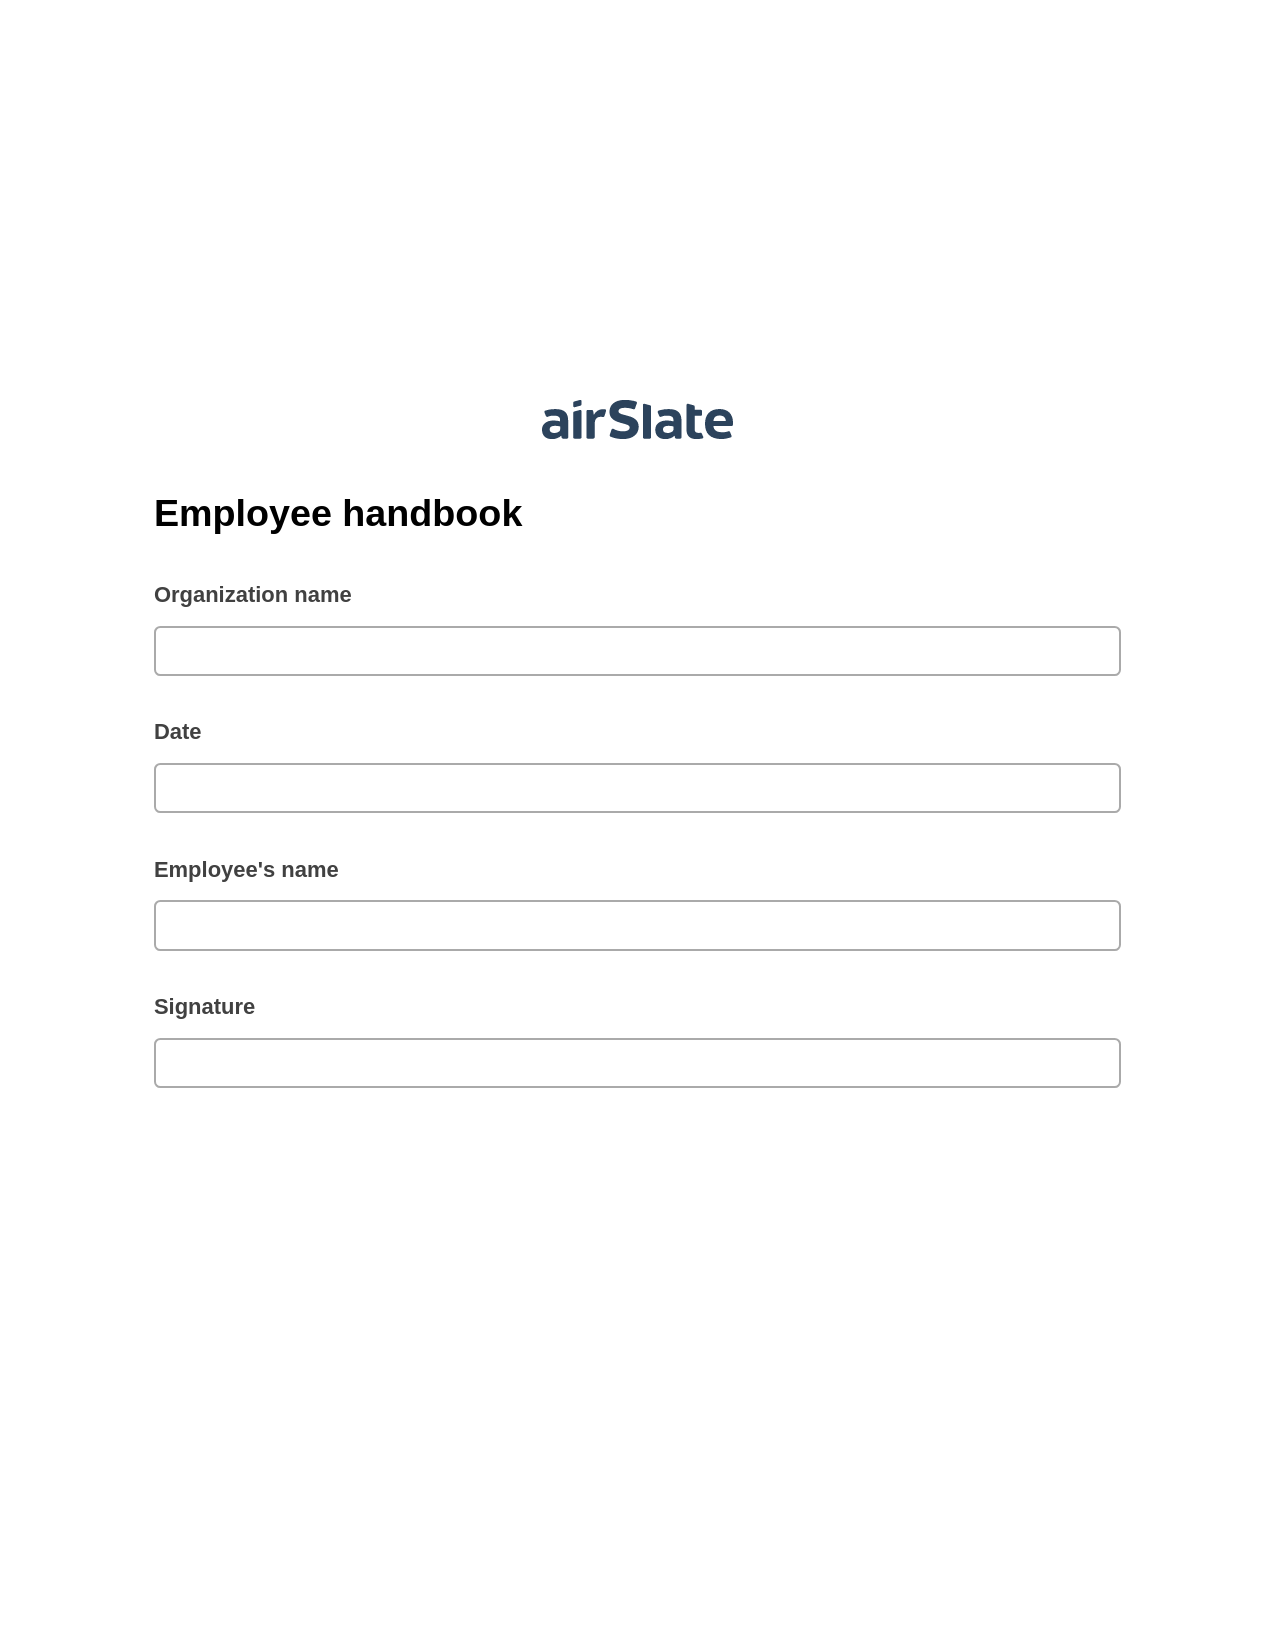 Employee handbook Pre-fill from Office 365 Excel Bot, Assign Roles to Recipients Bot, Archive to SharePoint Folder Bot